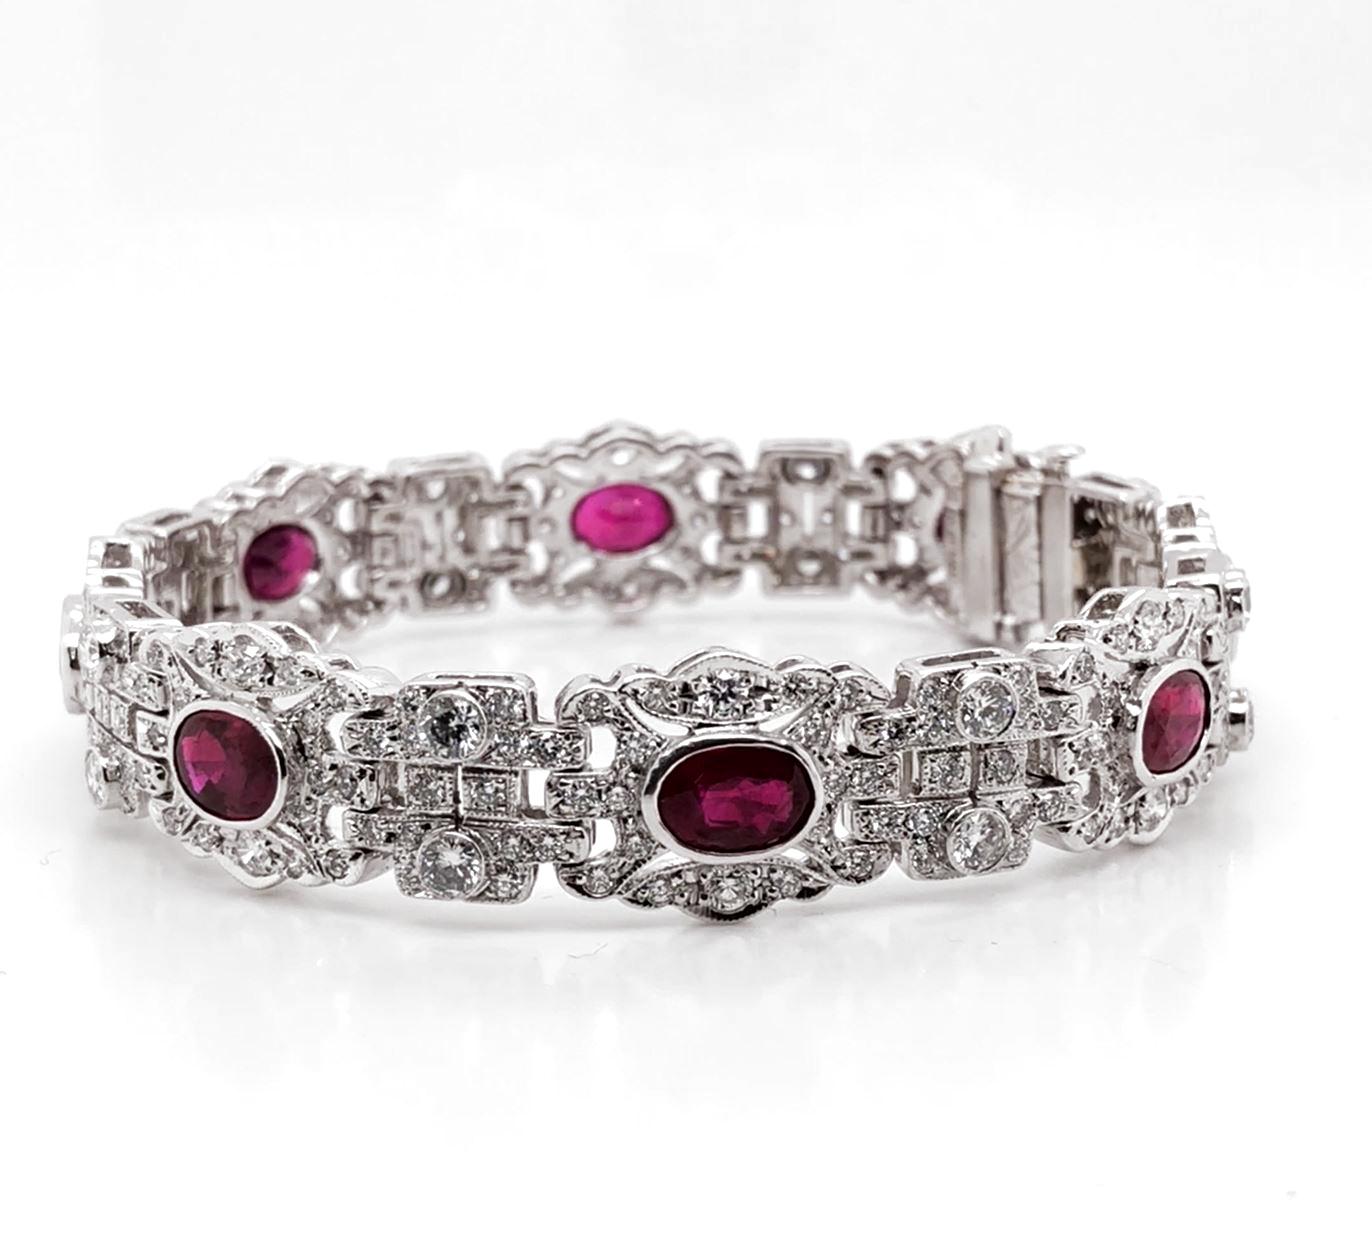 Oval Burmese Ruby Carat Diamond Platinum Bracelet In New Condition For Sale In New York, NY